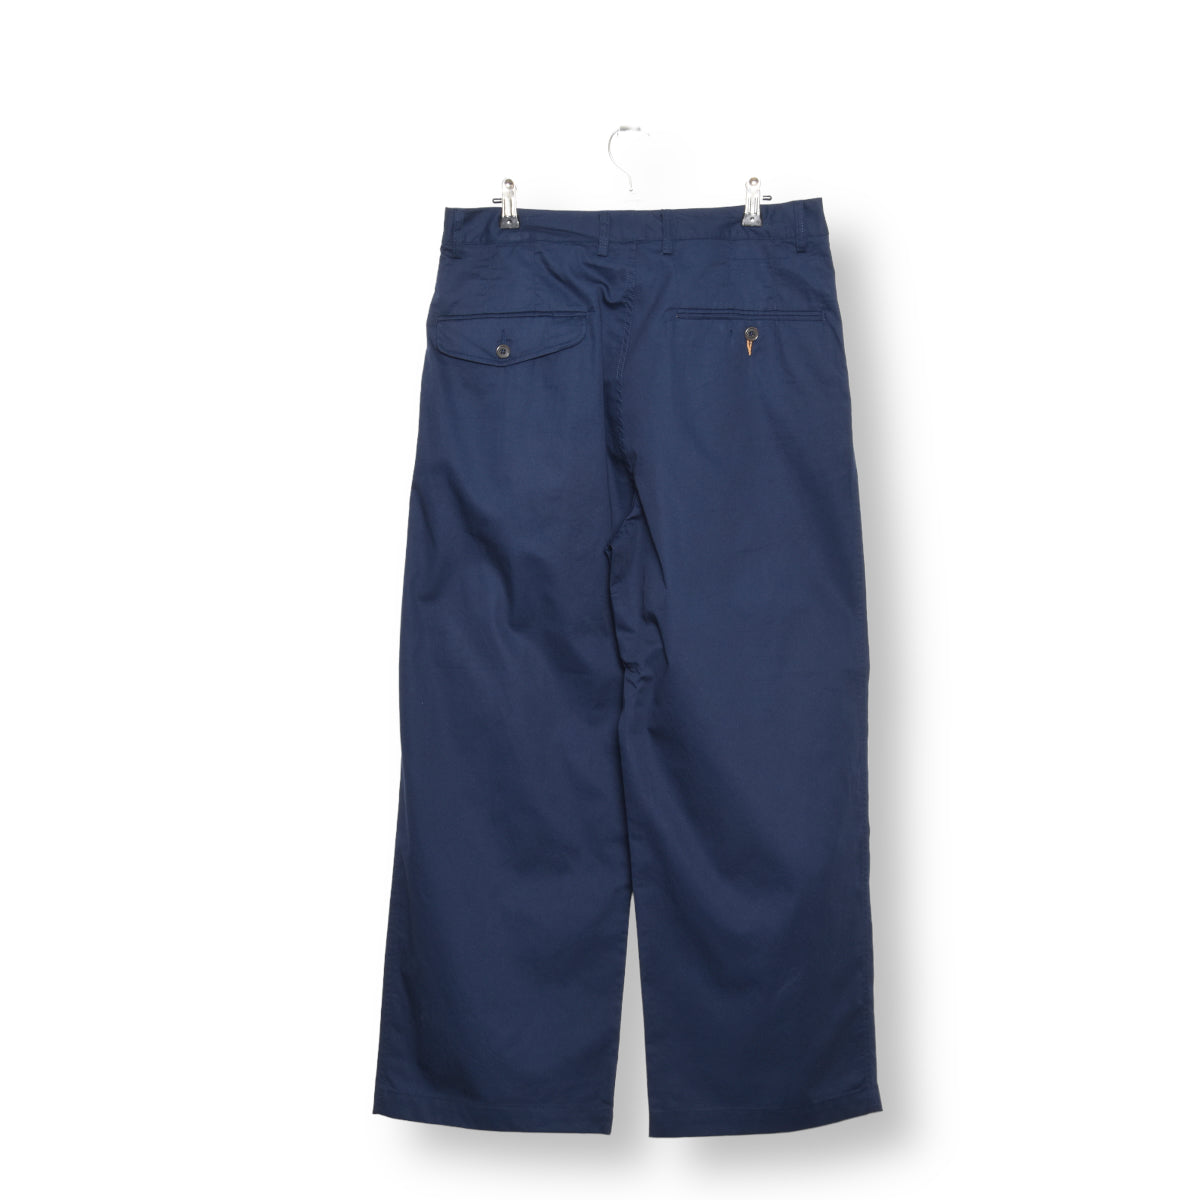 Universal Works Sailor Pant fine twill navy 28139